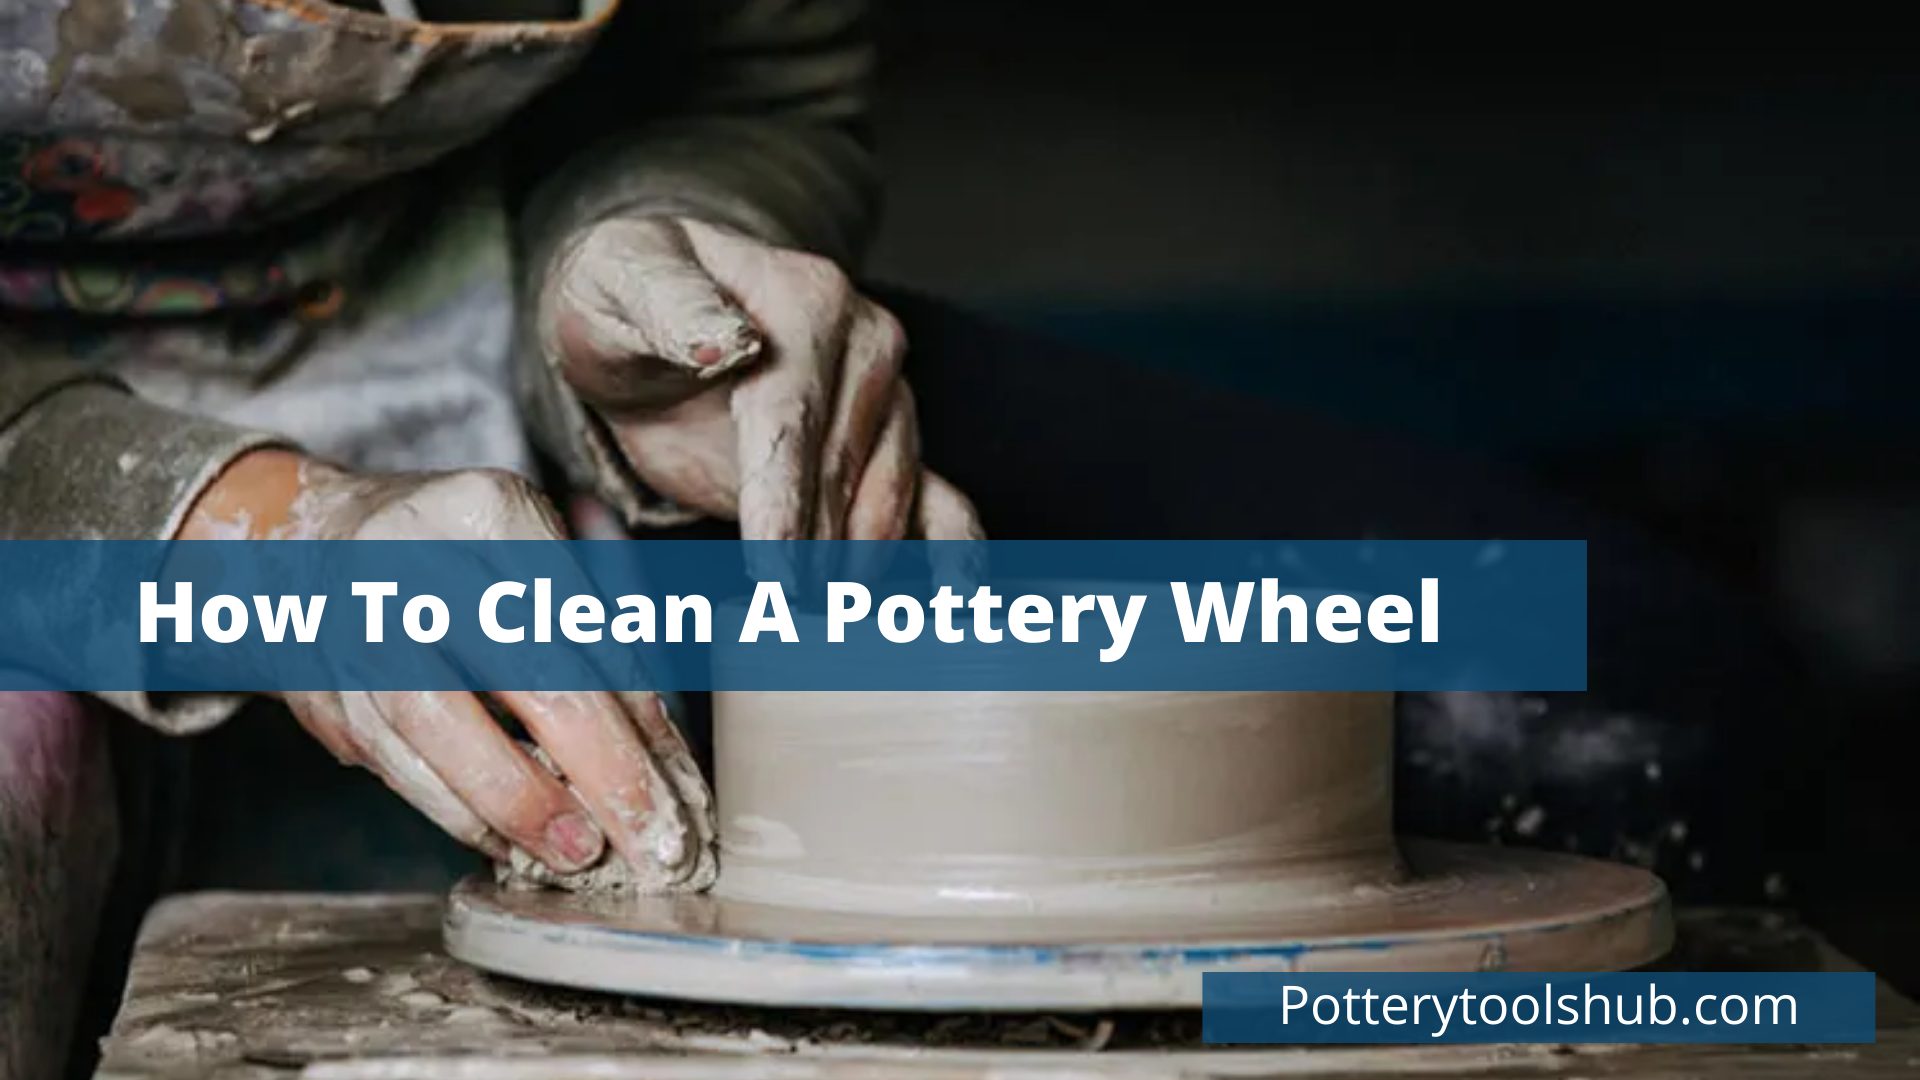 How To Clean A Pottery Wheel